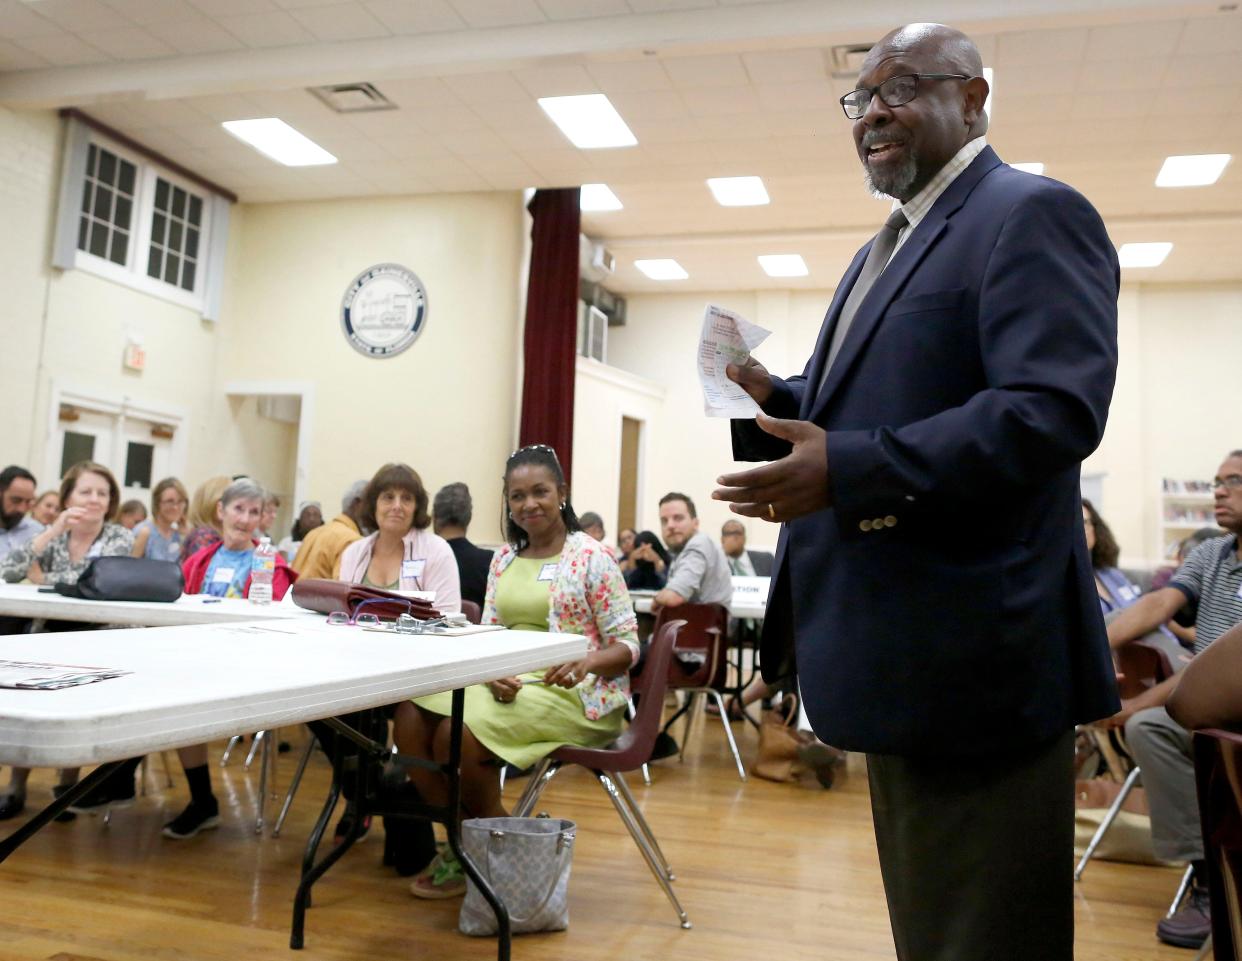 James Lawrence, the director of Gainesville For All, talks to the community members during the a kickoff meeting for the group held at the Thelma Bolton Center in Gainesville in 2016.